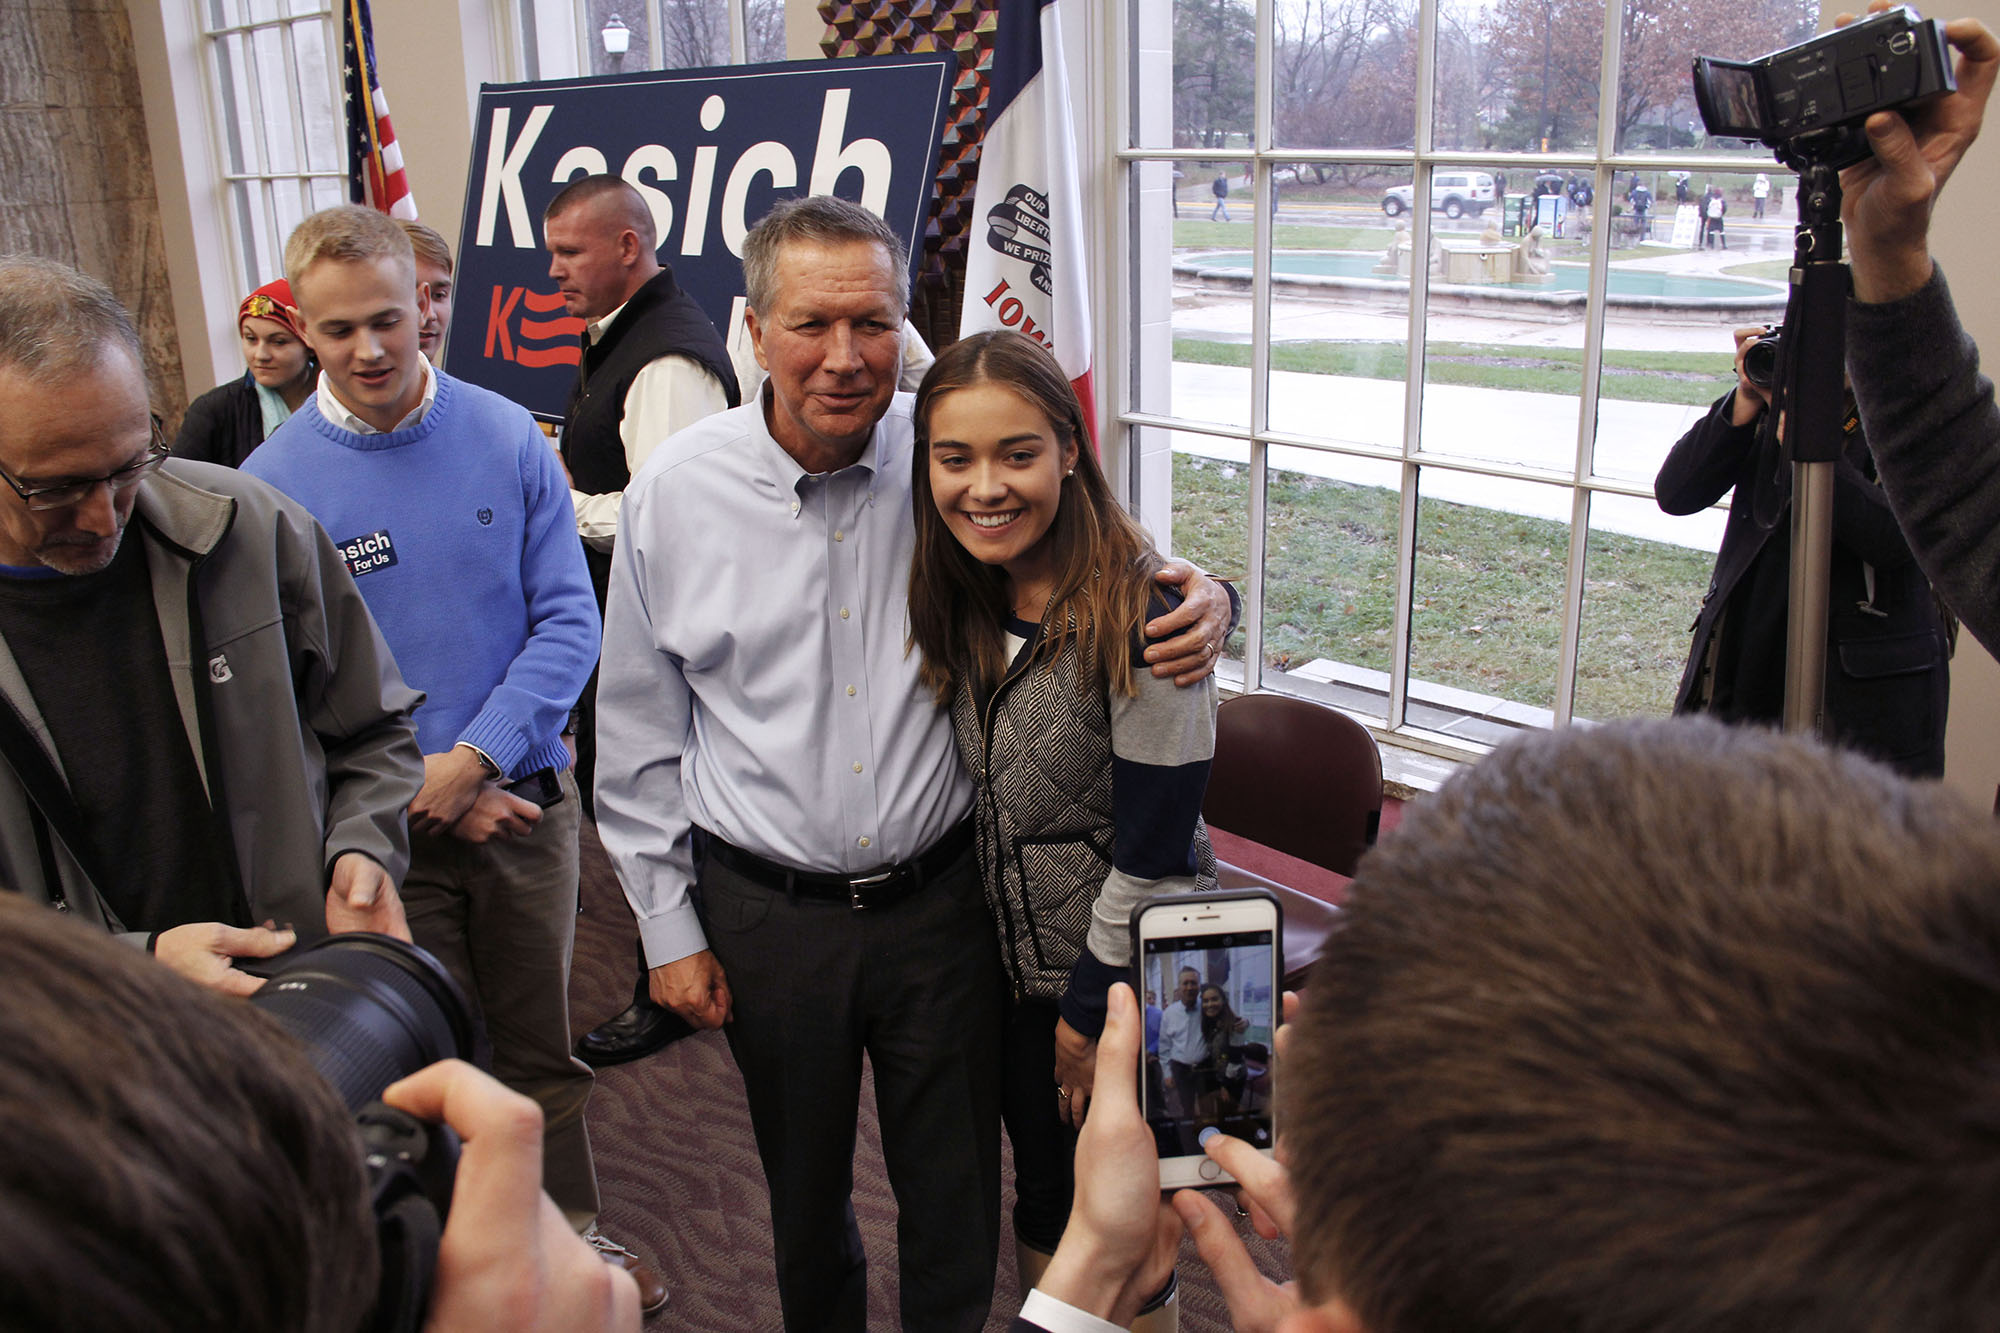 Republican and Ohio Governor John Kasich in Ames